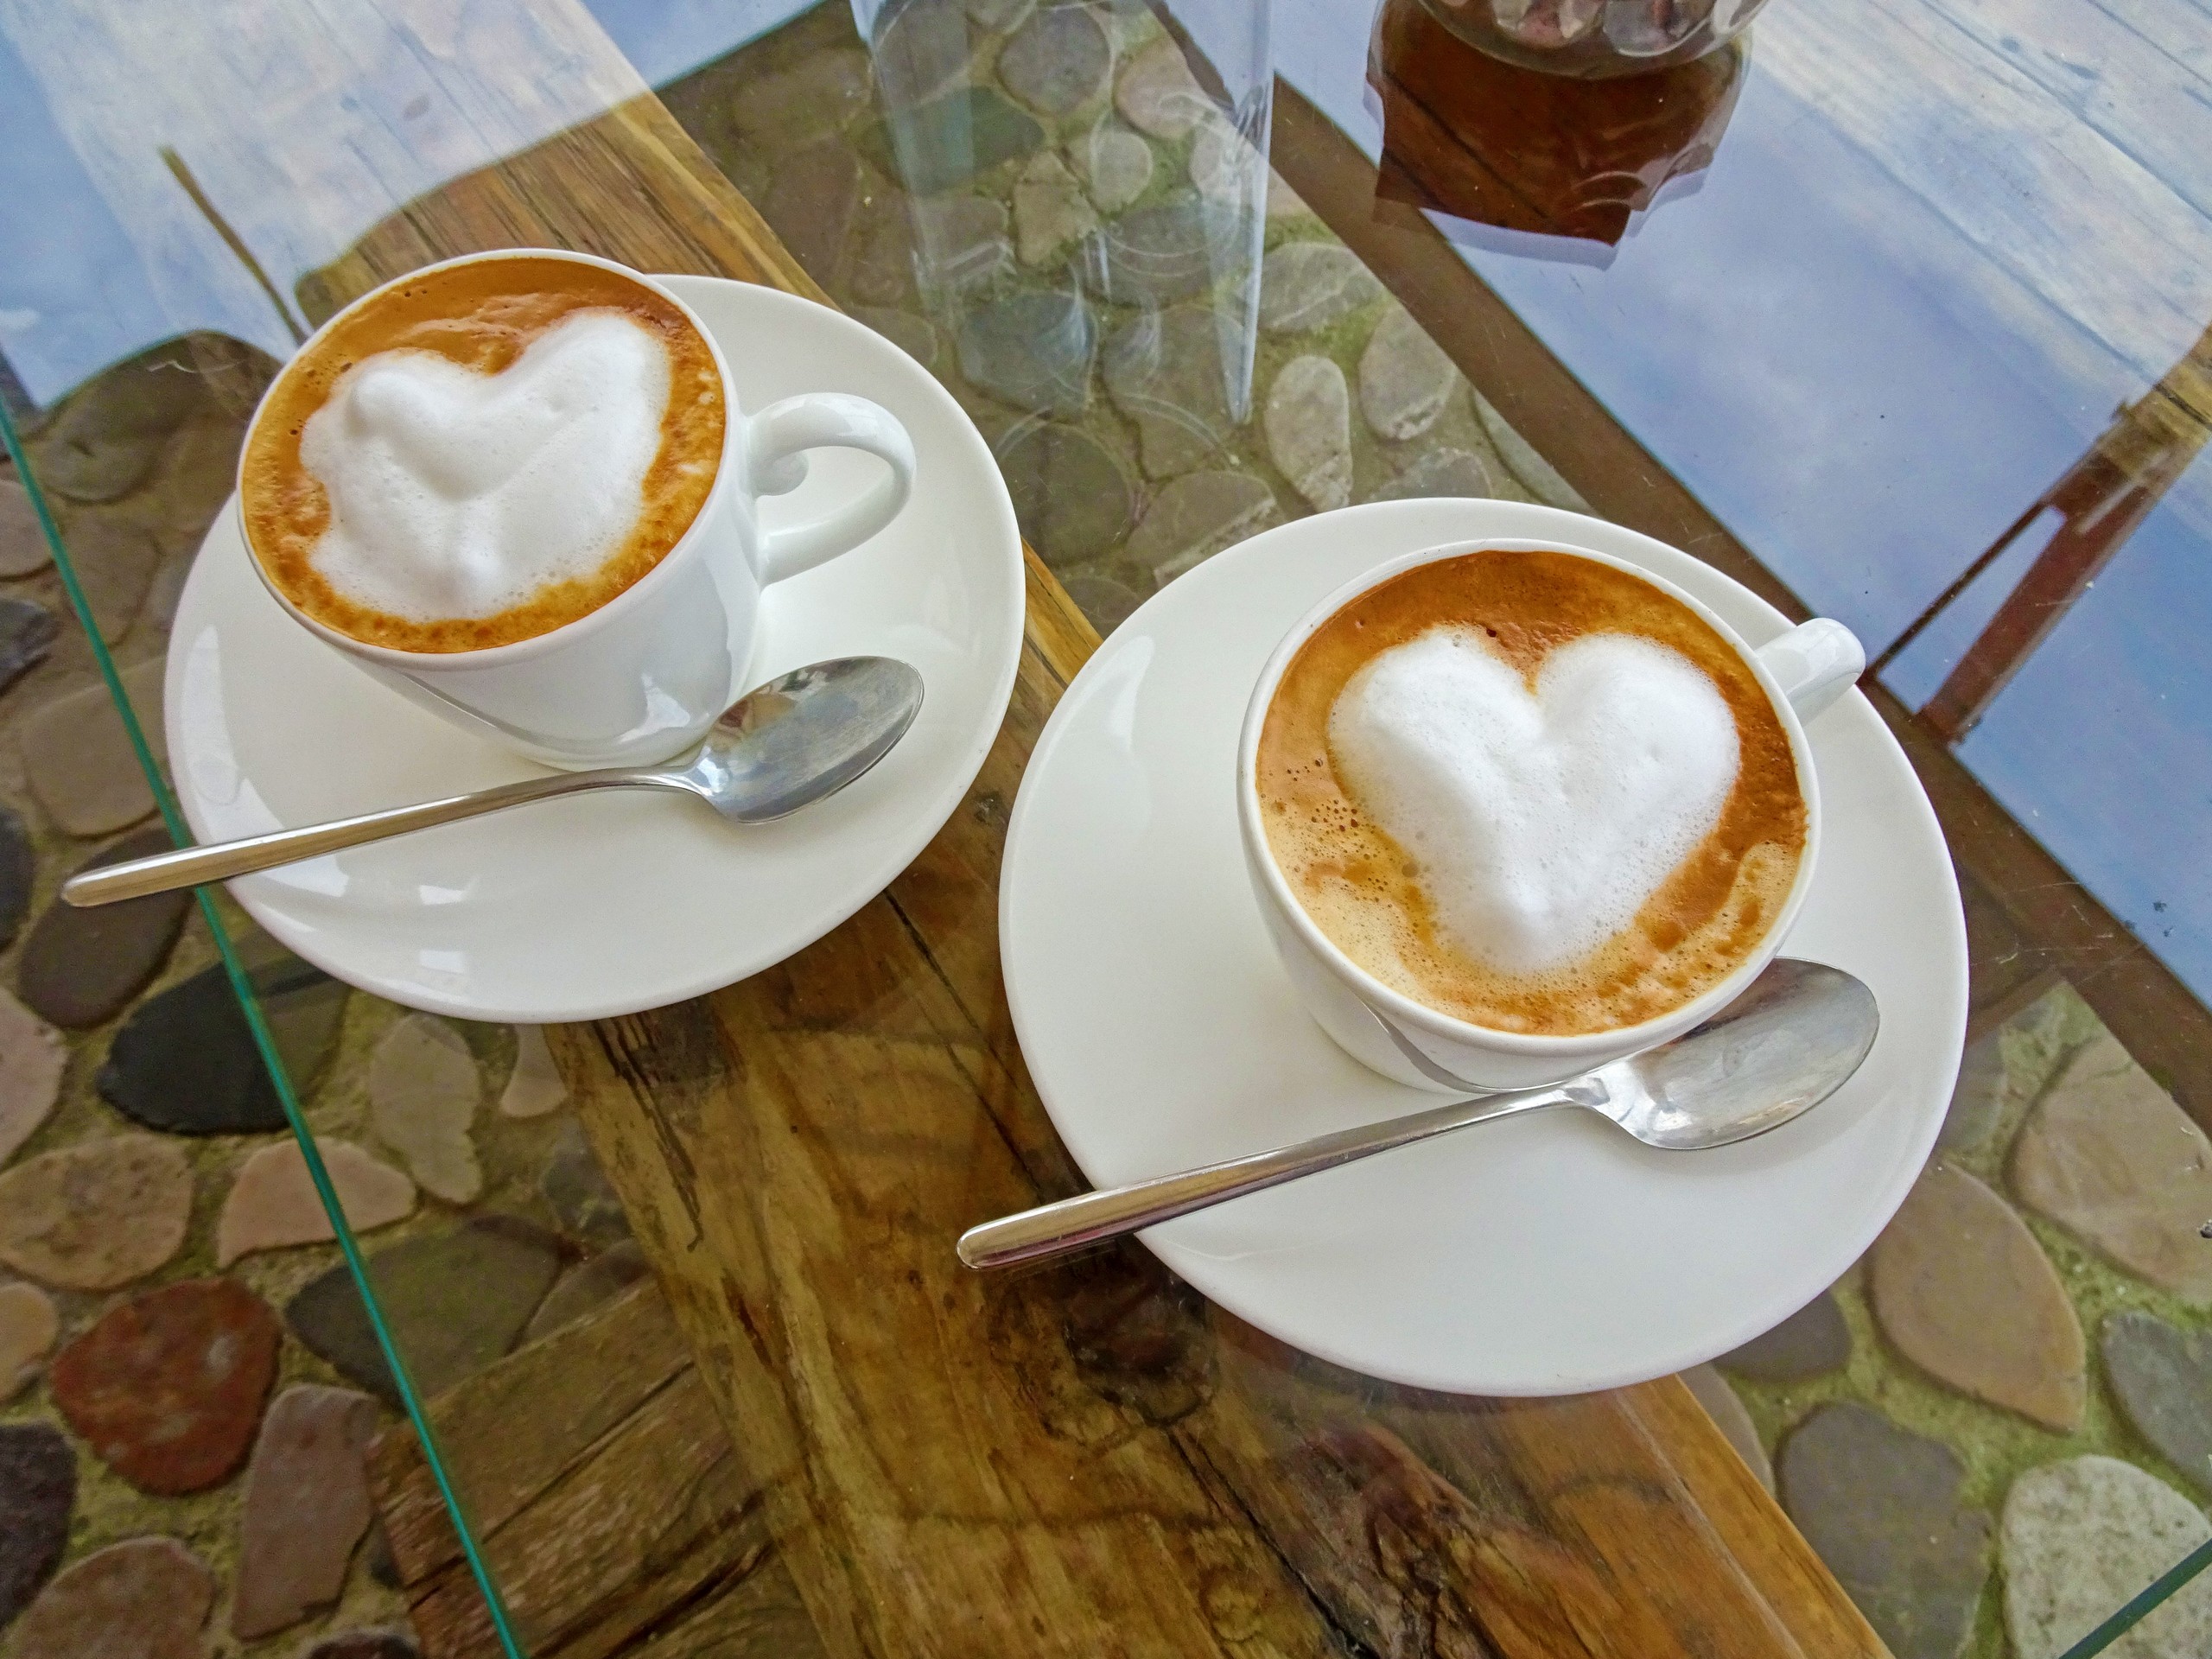 Two beautifully-done cappuchino coffees